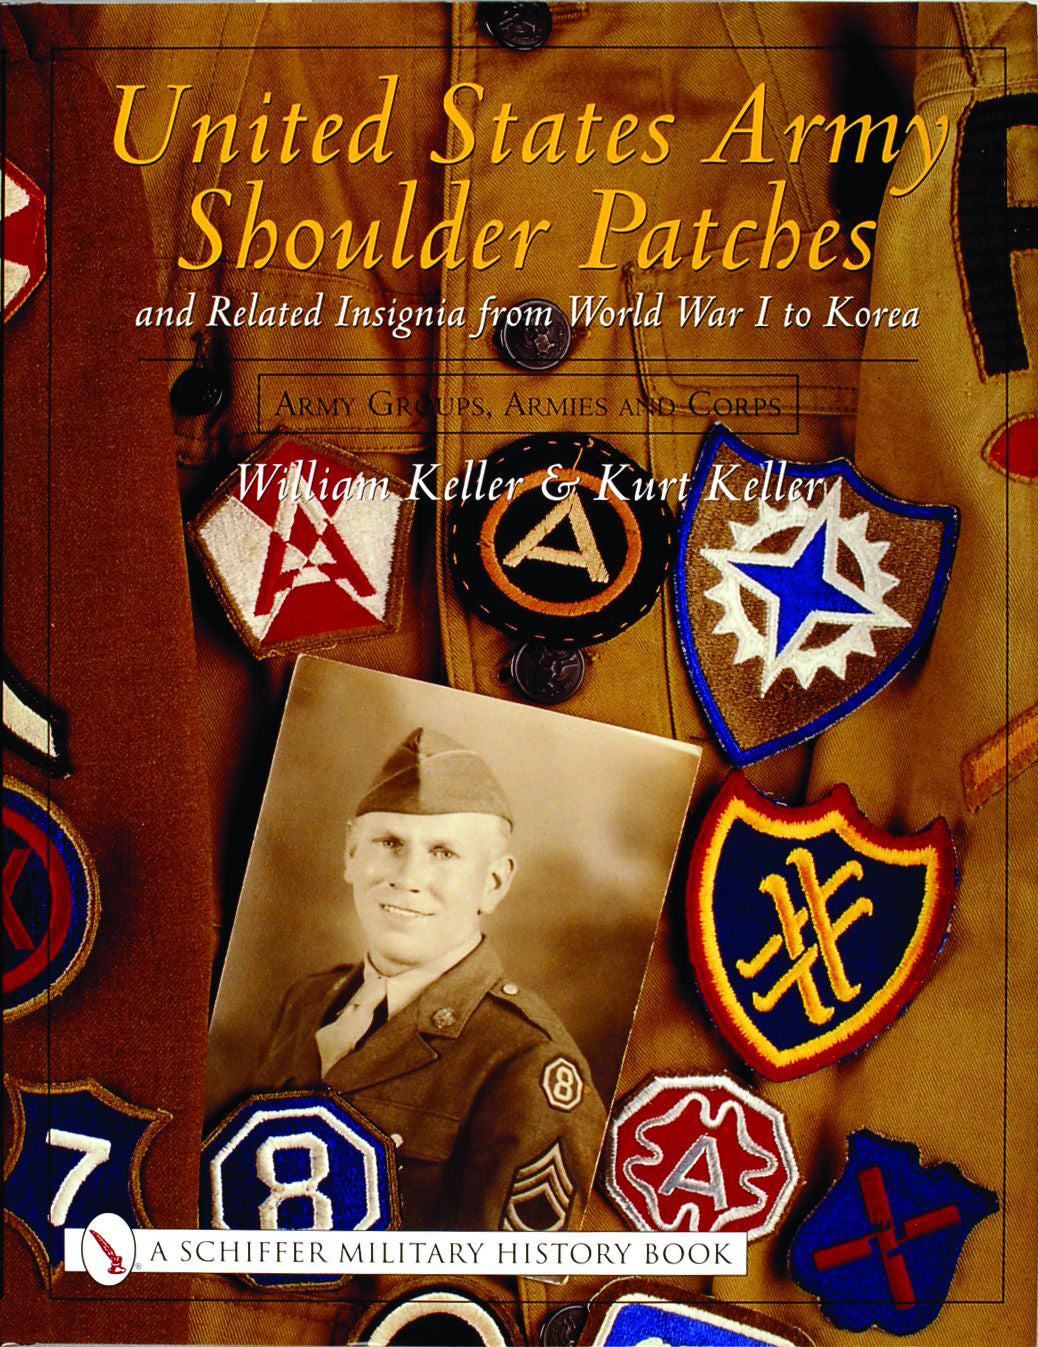 United States Army Shoulder Patches and Related Insignia from World War I to Korea